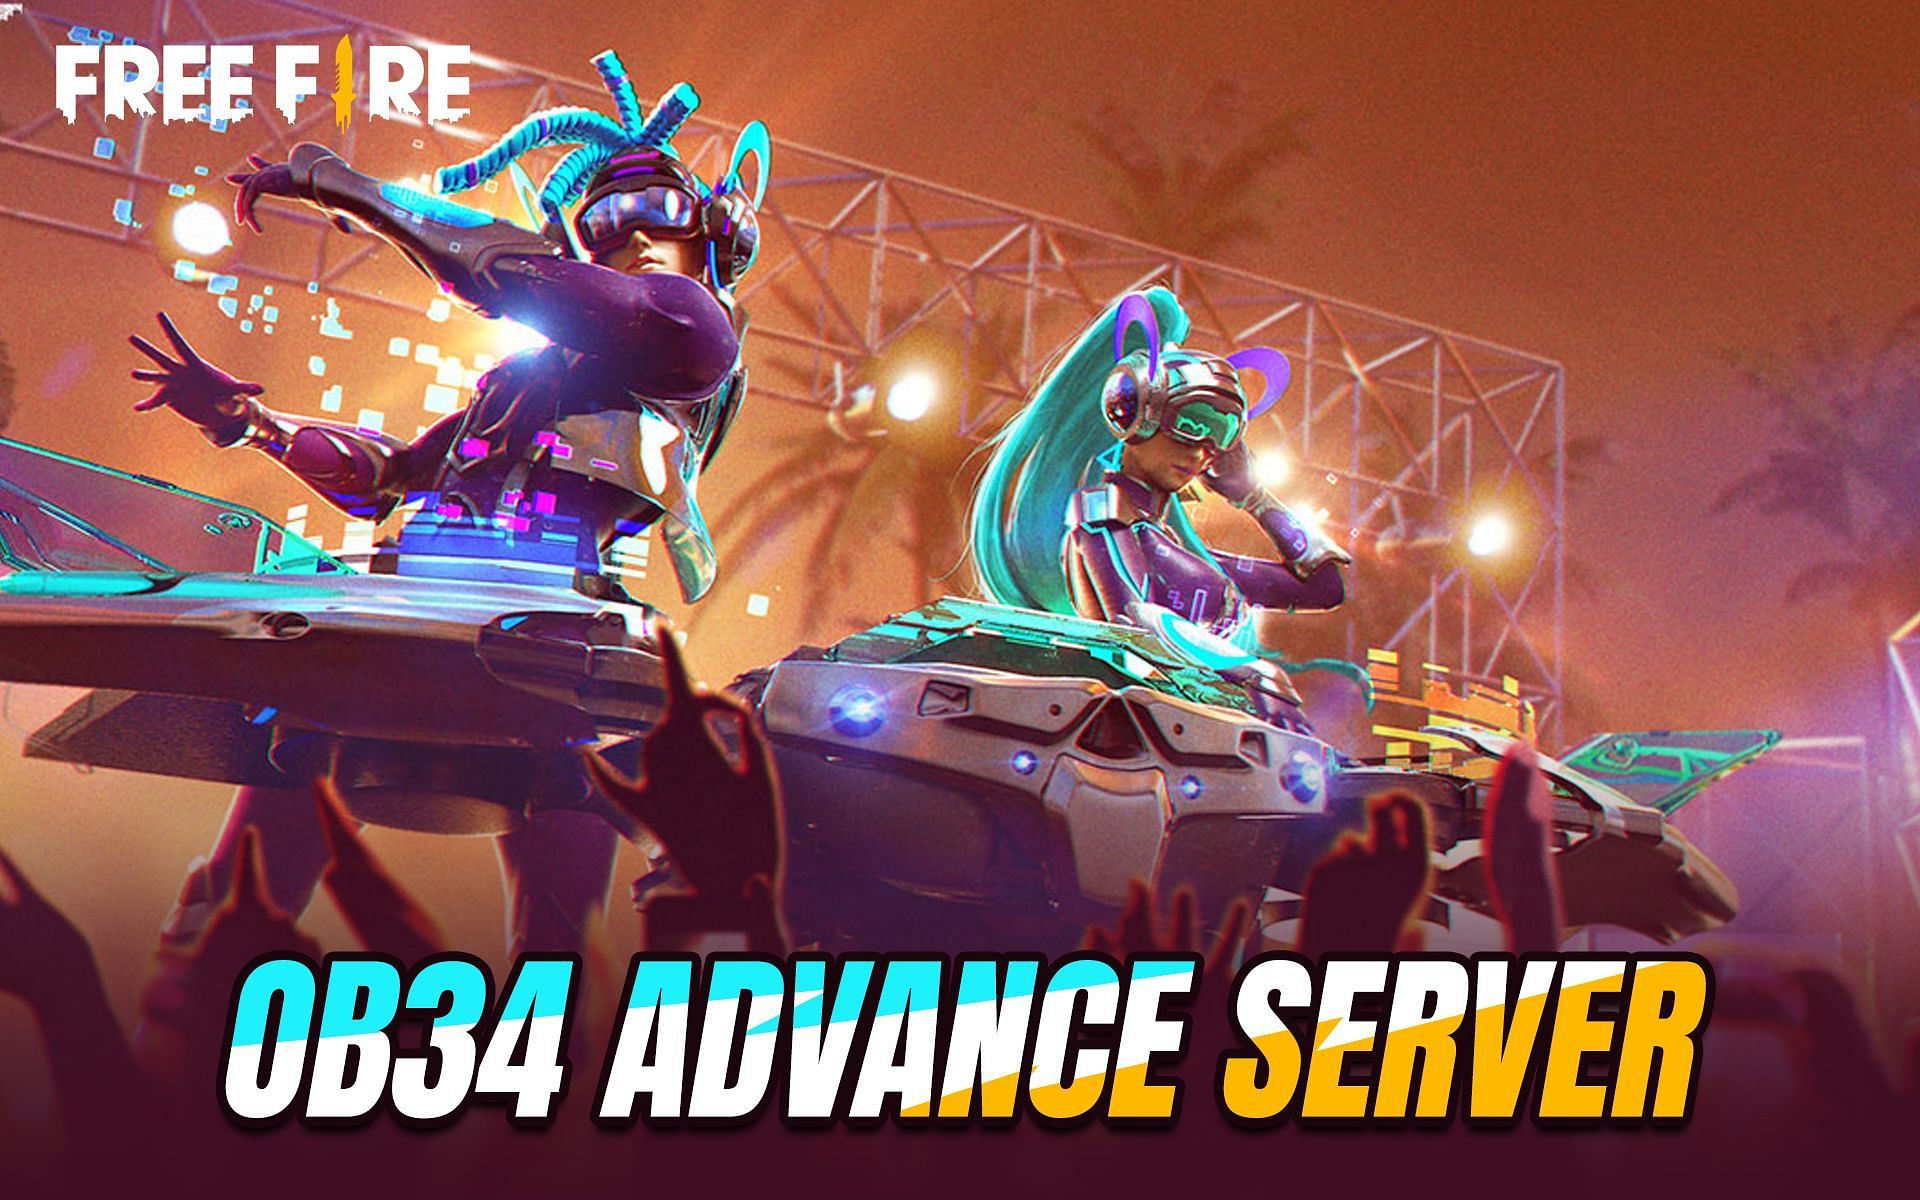 Free Fire Advance Server OB34 APK download method, release date, and how to  get Activation Key